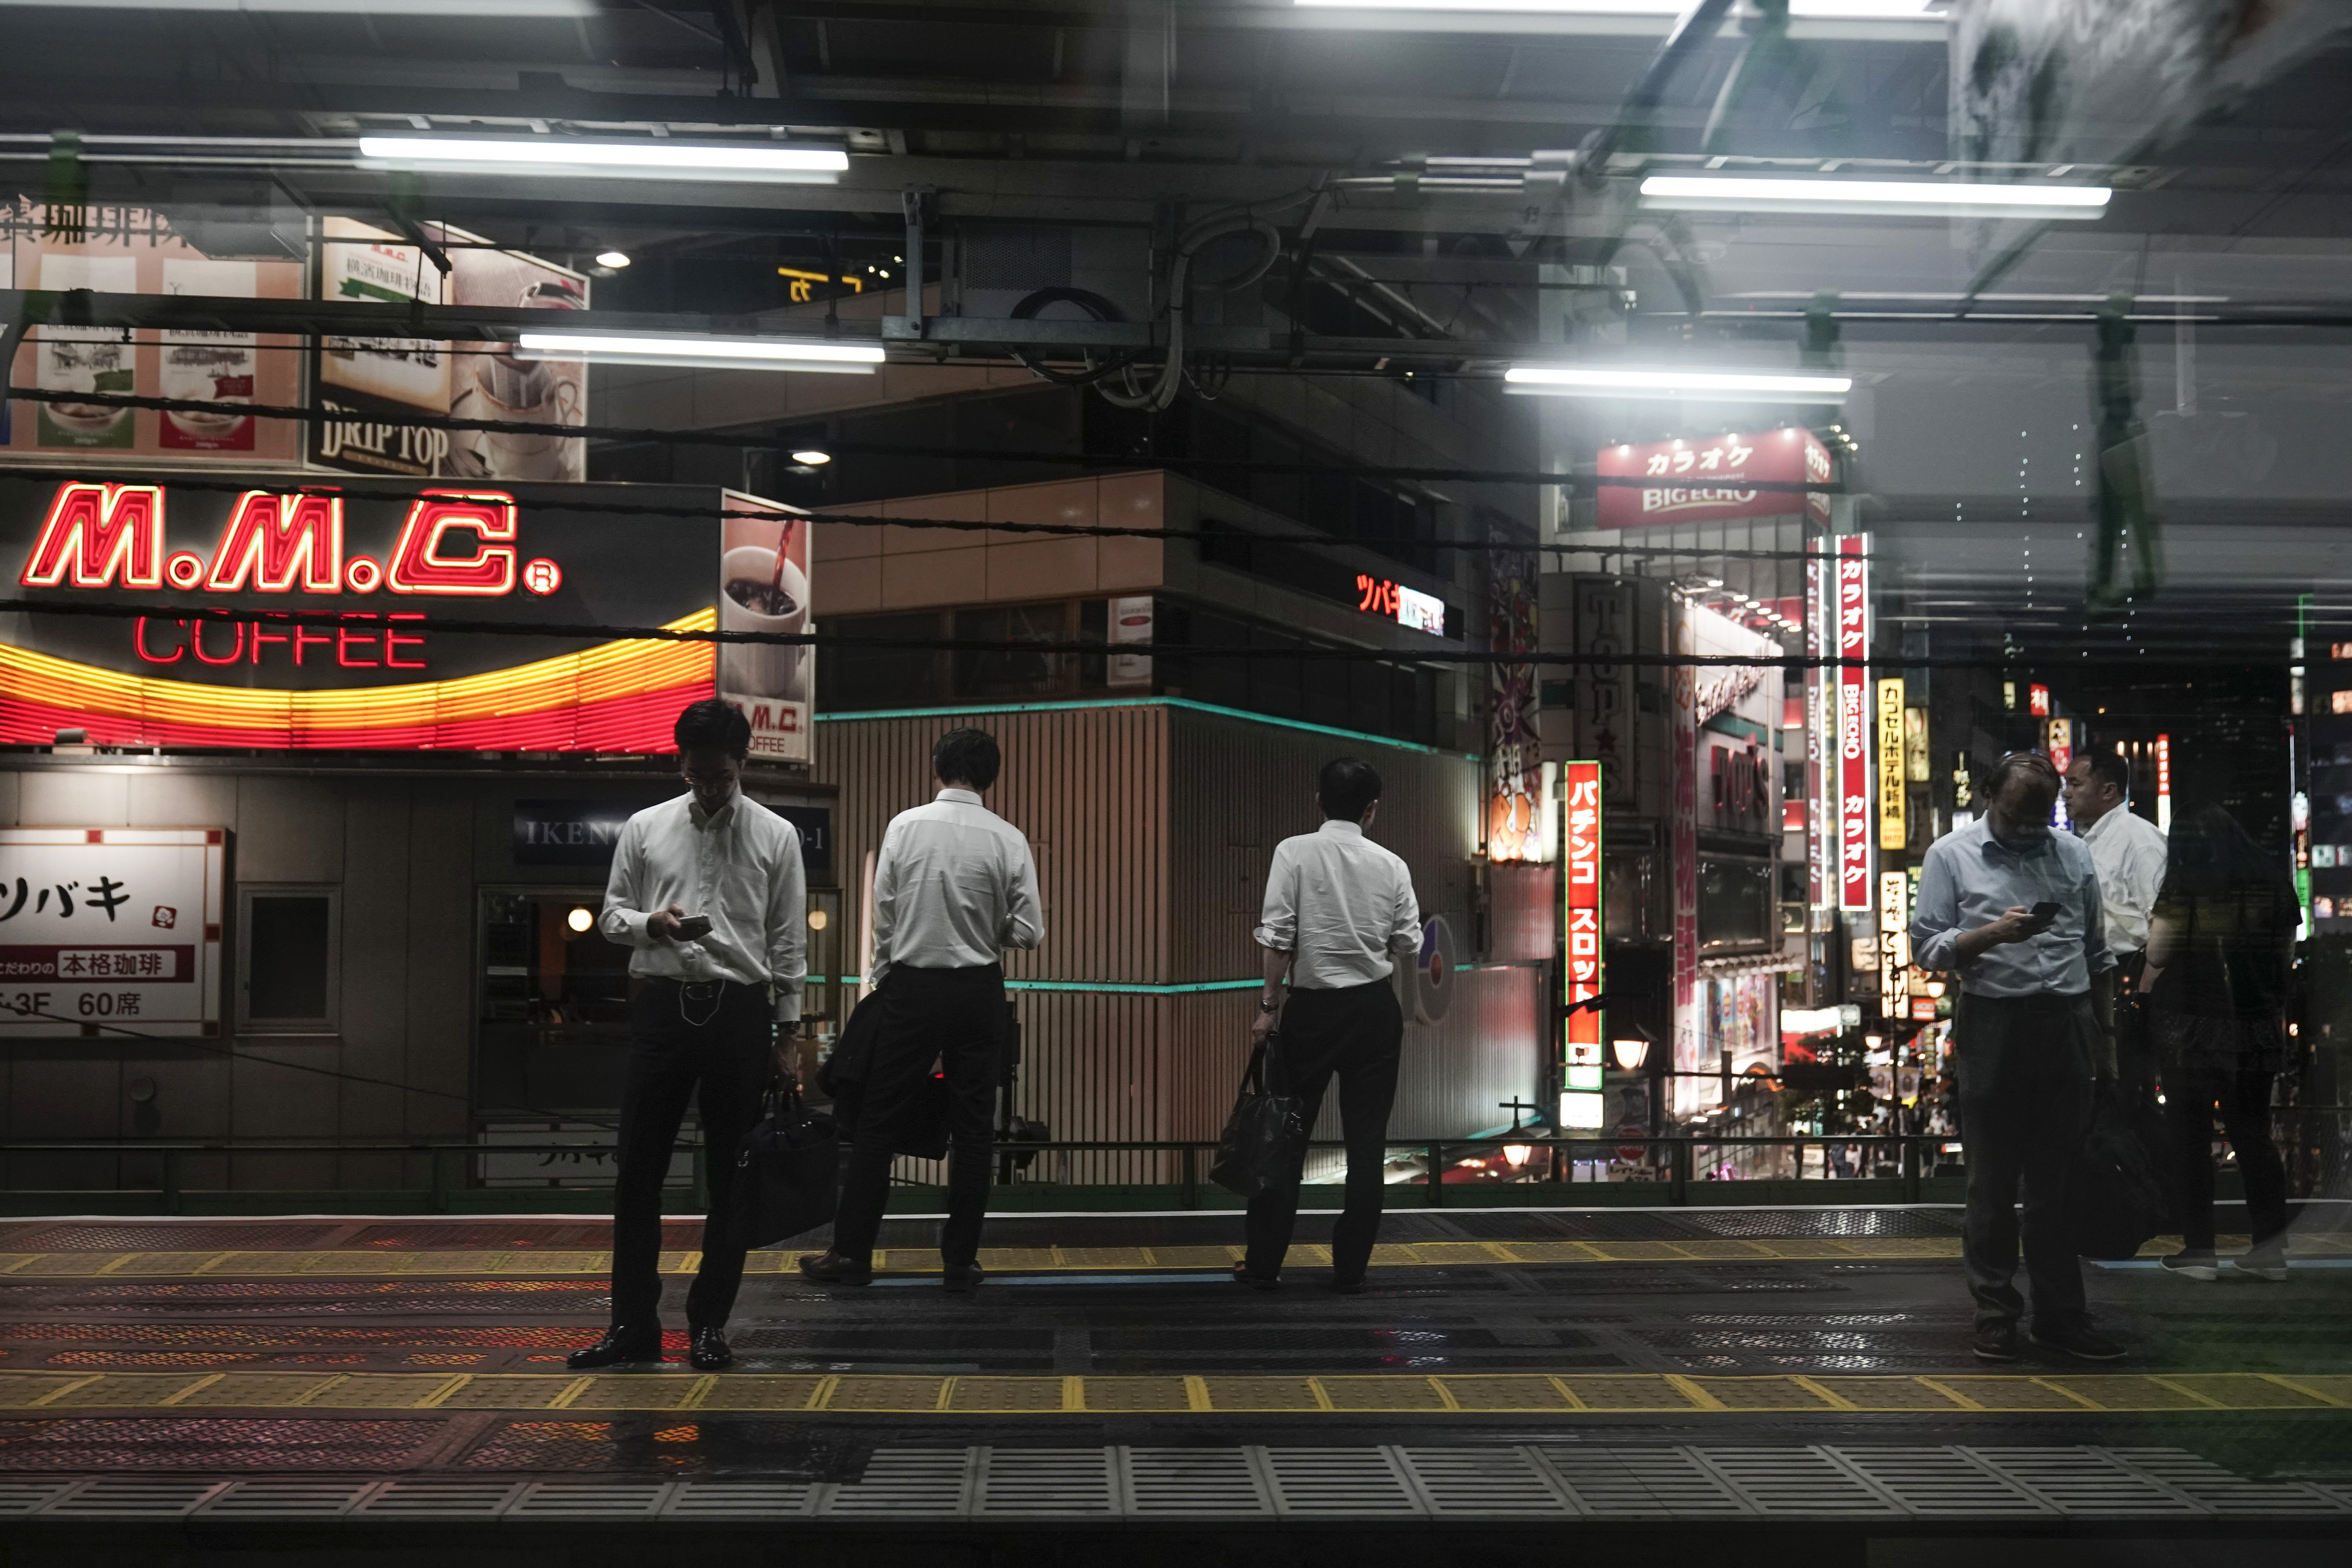 In this Friday, May 24, 2019, photo, commuters waiting for a train are seen through the window of a Yamanote Line train at Shimbashi Station in Tokyo. Running above ground, views from wide windows on the train range from high-rises to local shopping arcade as the train covers different parts of the city. The line, according to company statistics, moves roughly 3 to 4 million people daily, more than the entire population of Jamaica. (AP Photo/Jae C. Hong)